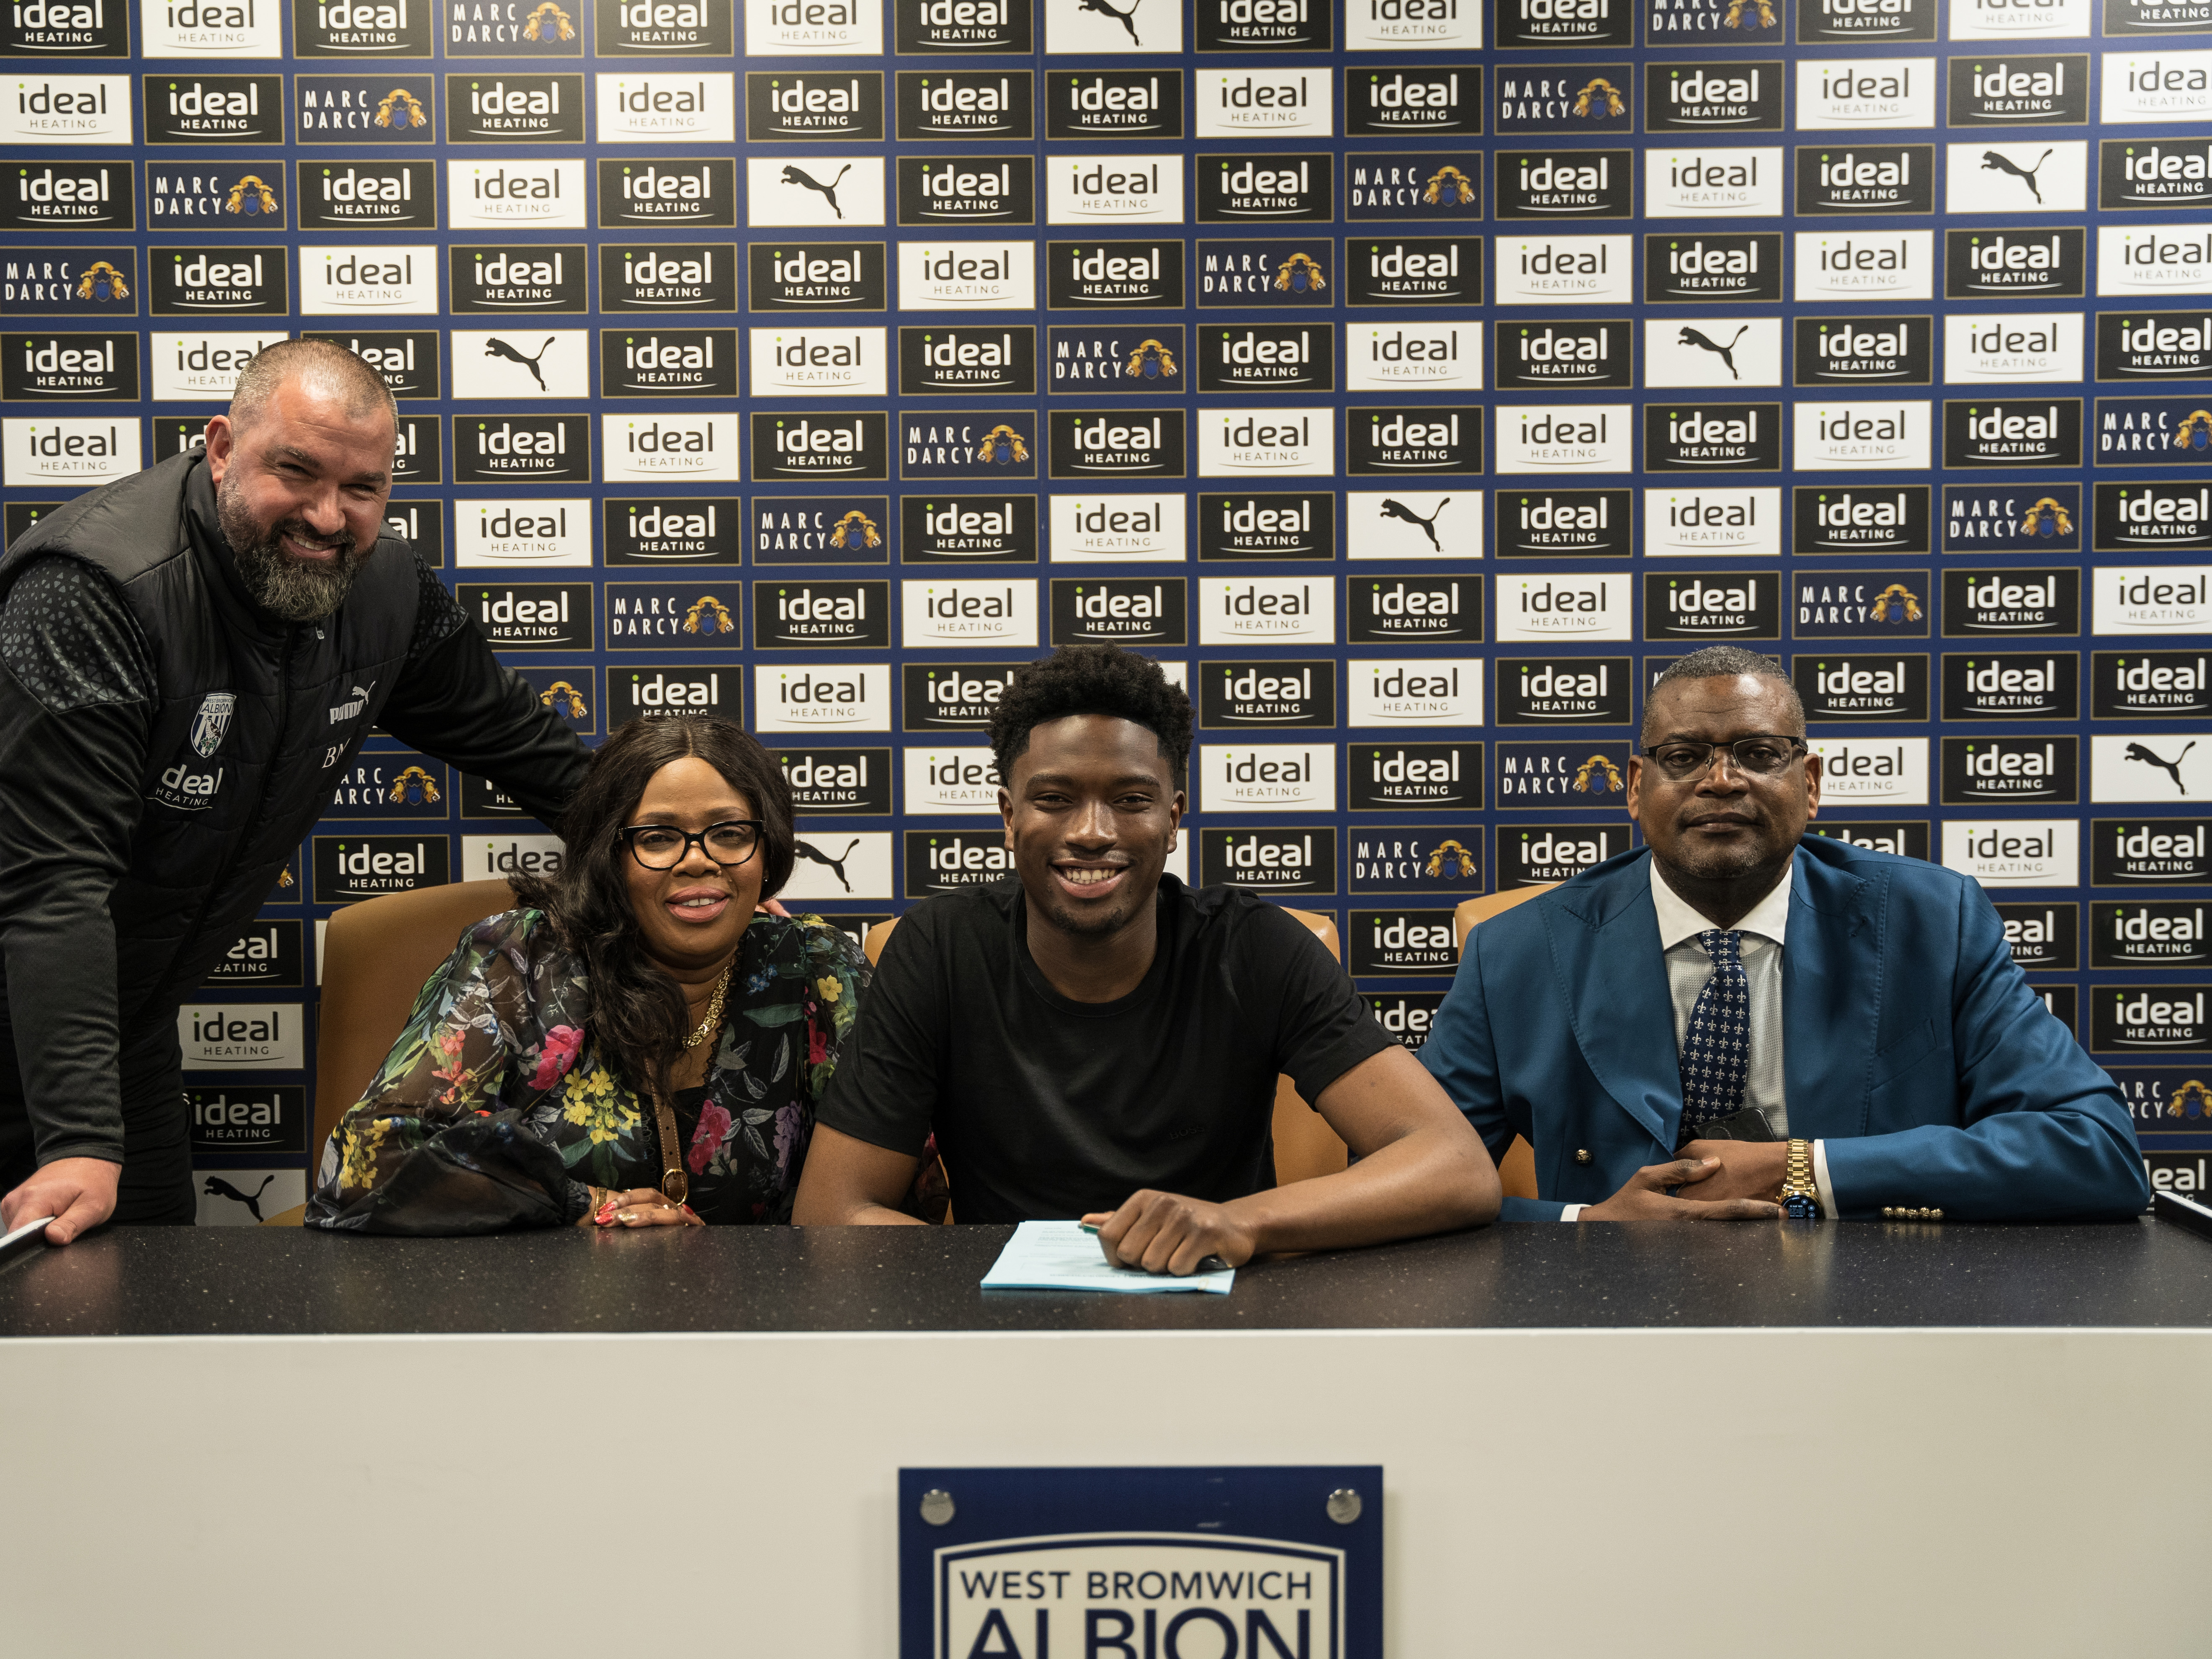 A photo of Ben Cisse, his family, and academy goalkeeping coach Boaz Myhill posing for Cisse signing his professional contract